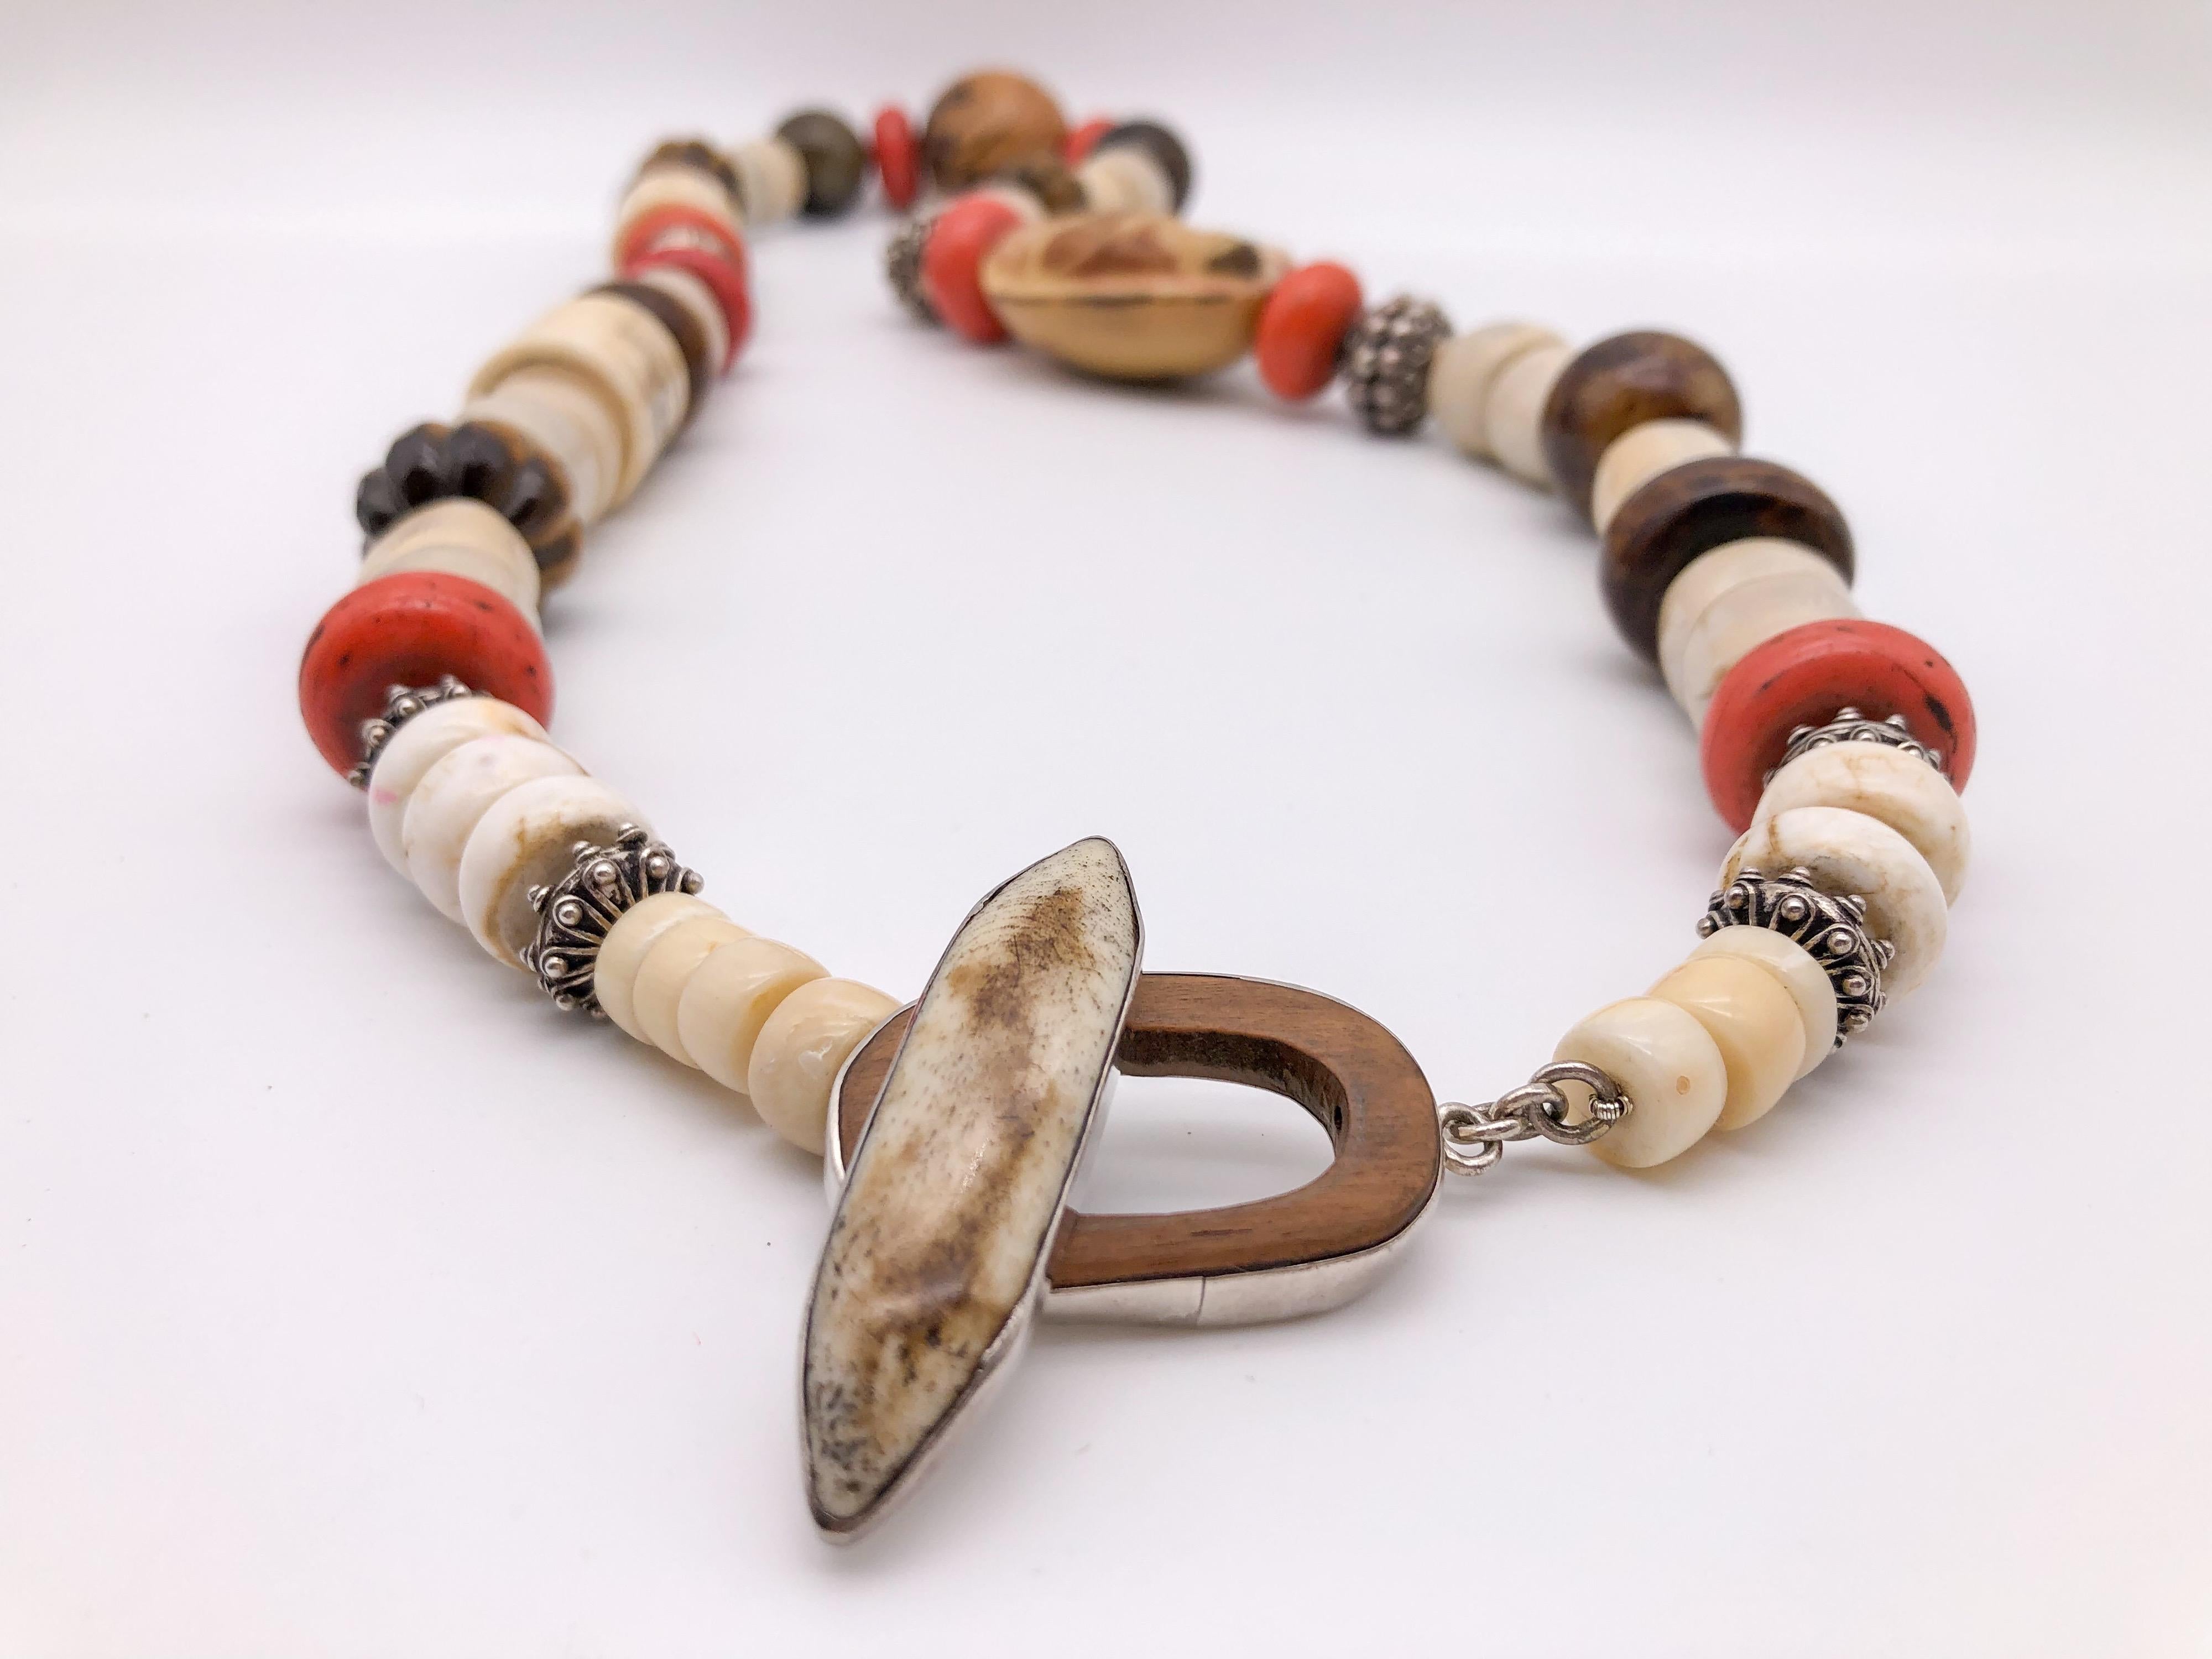 A.Jeschel Colorful Ethnic Tibetan beads and Carved Buddha necklace For Sale 8